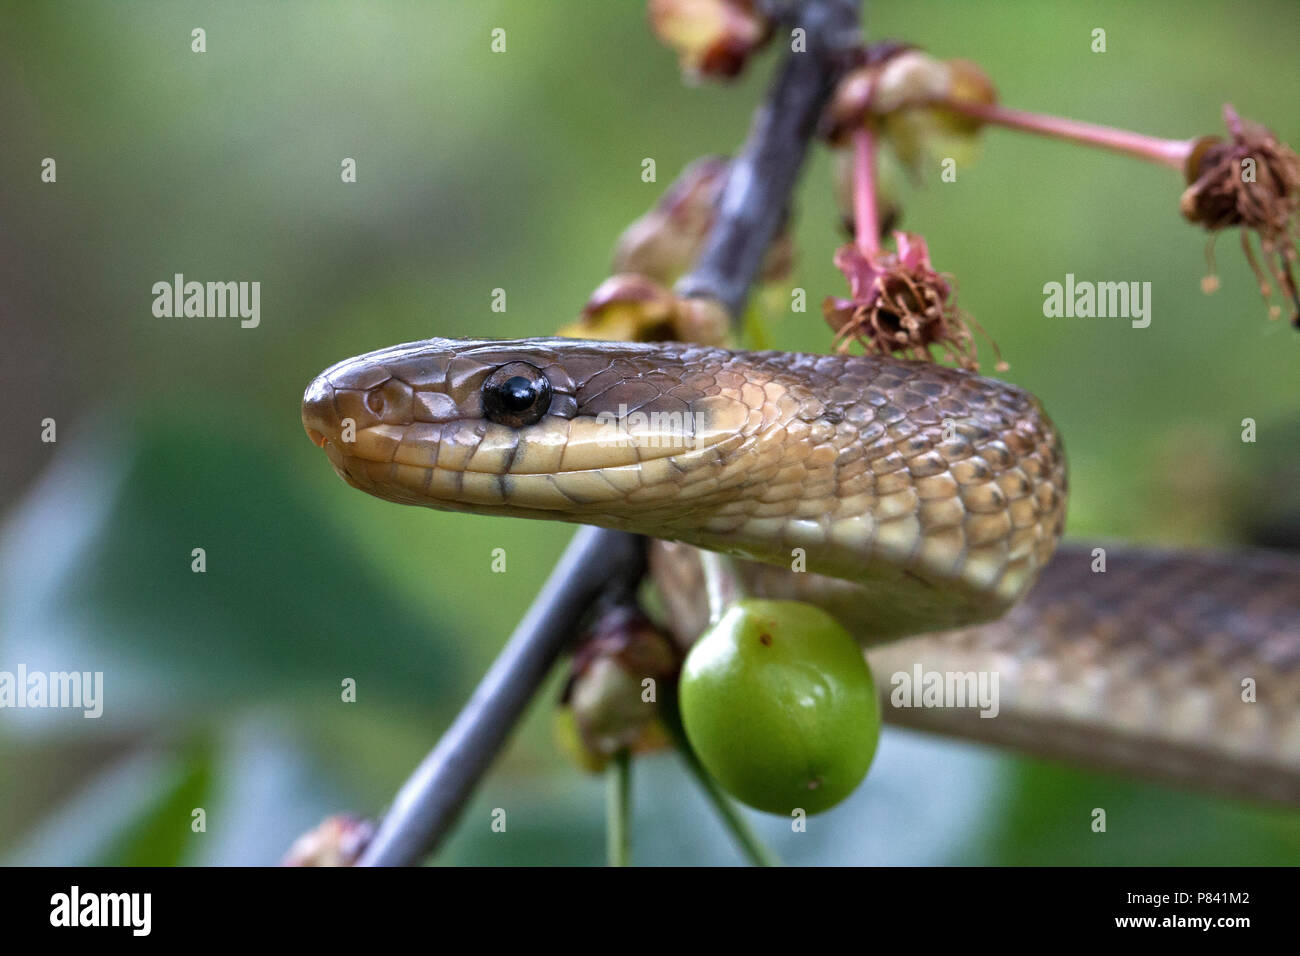 Esculaapslang in een boom;  Aesculapian Snake in a tree Stock Photo